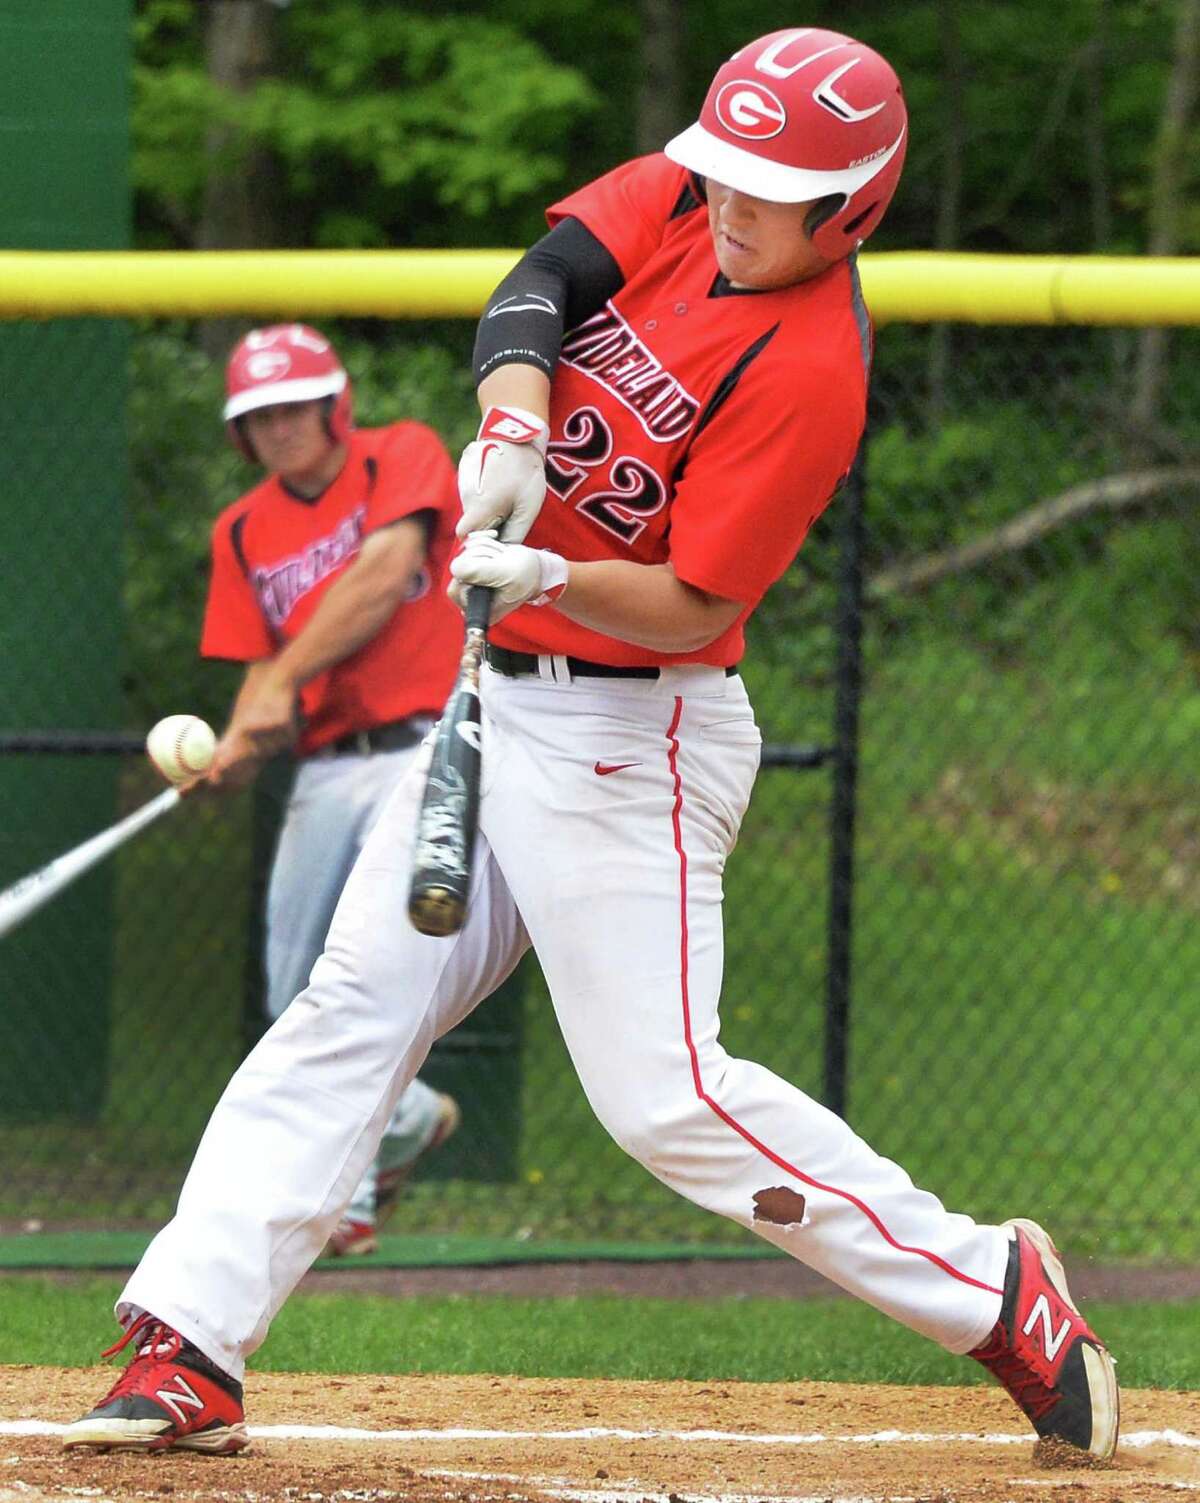 Guilderland's #22 Zach Formica hits a home run against Shen in the Class AA quarterfinal game Friday May 23, 2014, 2014, in Clifton Park, NY. (John Carl D'Annibale / Times Union)